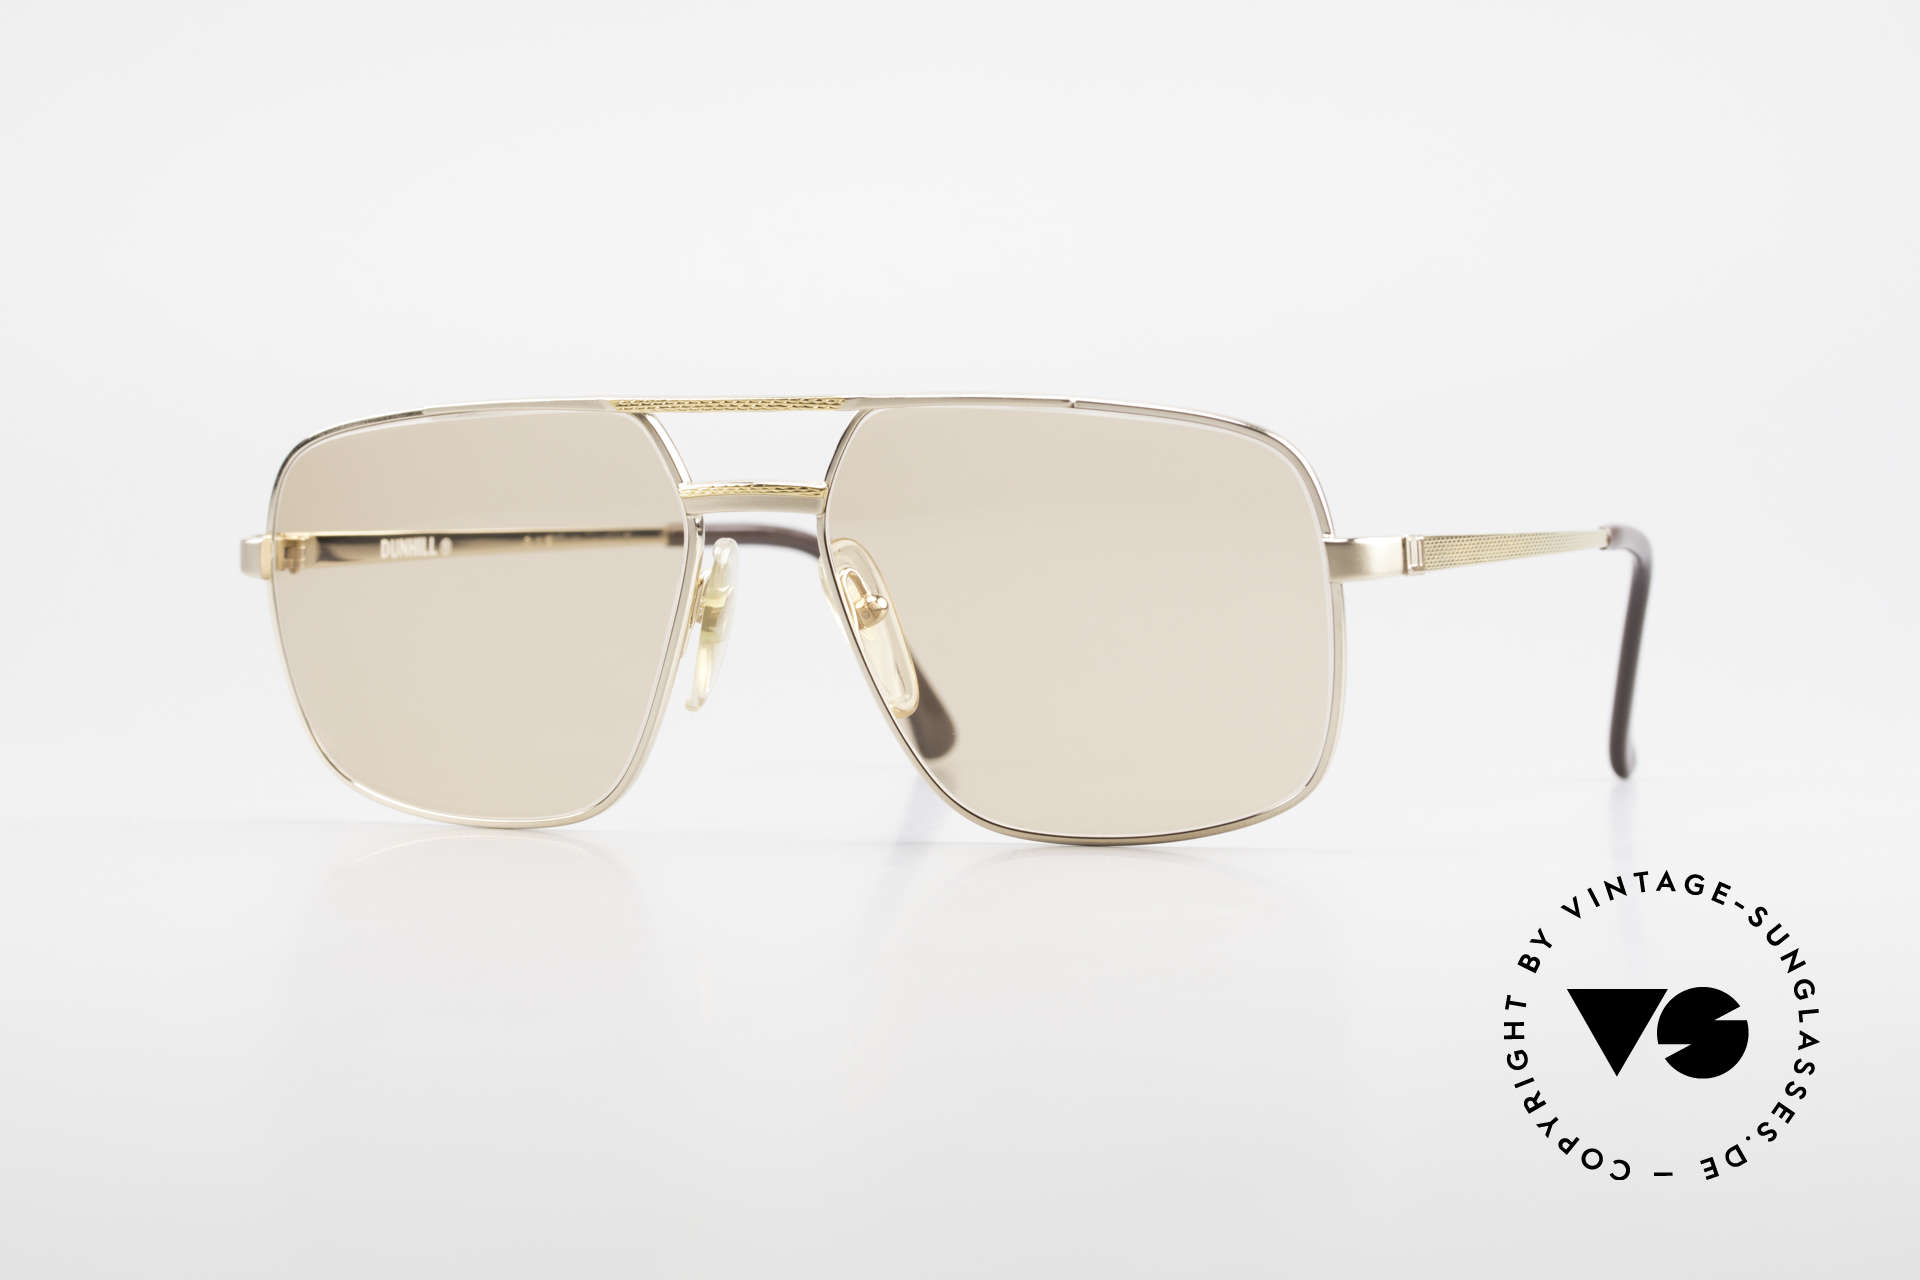 Dunhill 6068 Gold Plated Frame Changeable, LUXURY vintage sunglasses by A. DUNHILL from 1987, Made for Men